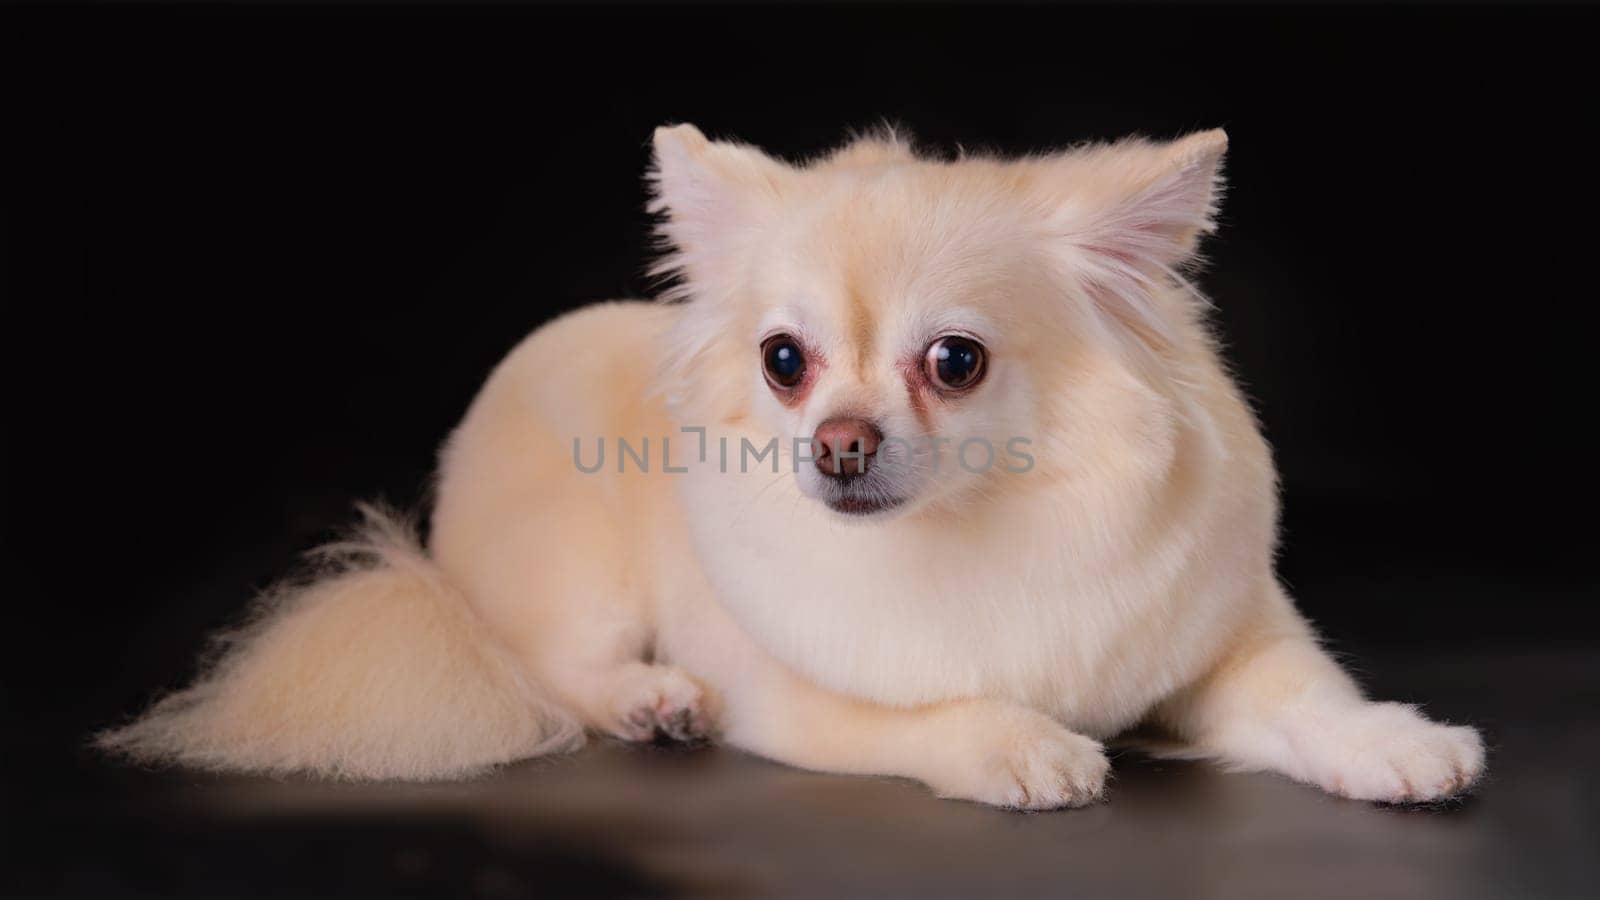 Chihuahua dog lying on a black background in close-up. Studio photo